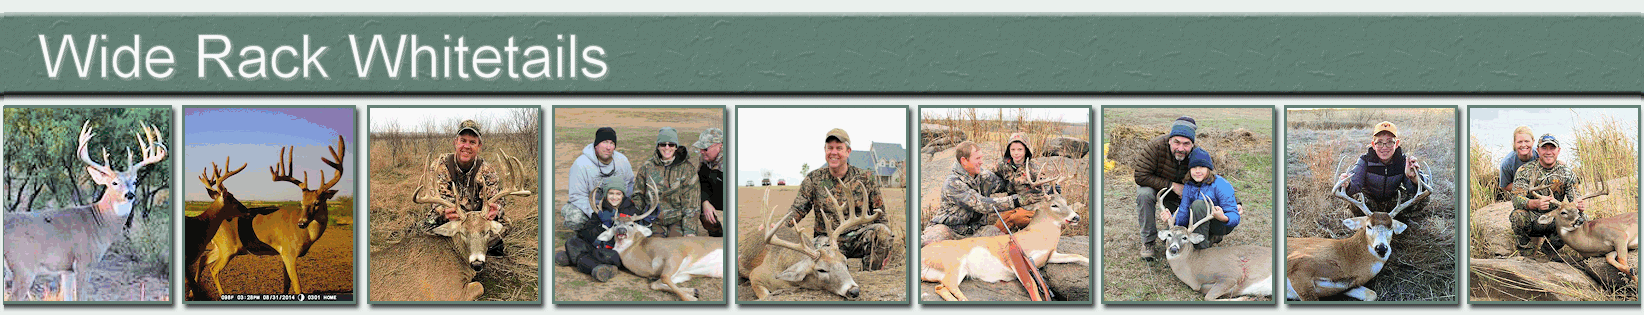 R&P Whitetails Photo Galery